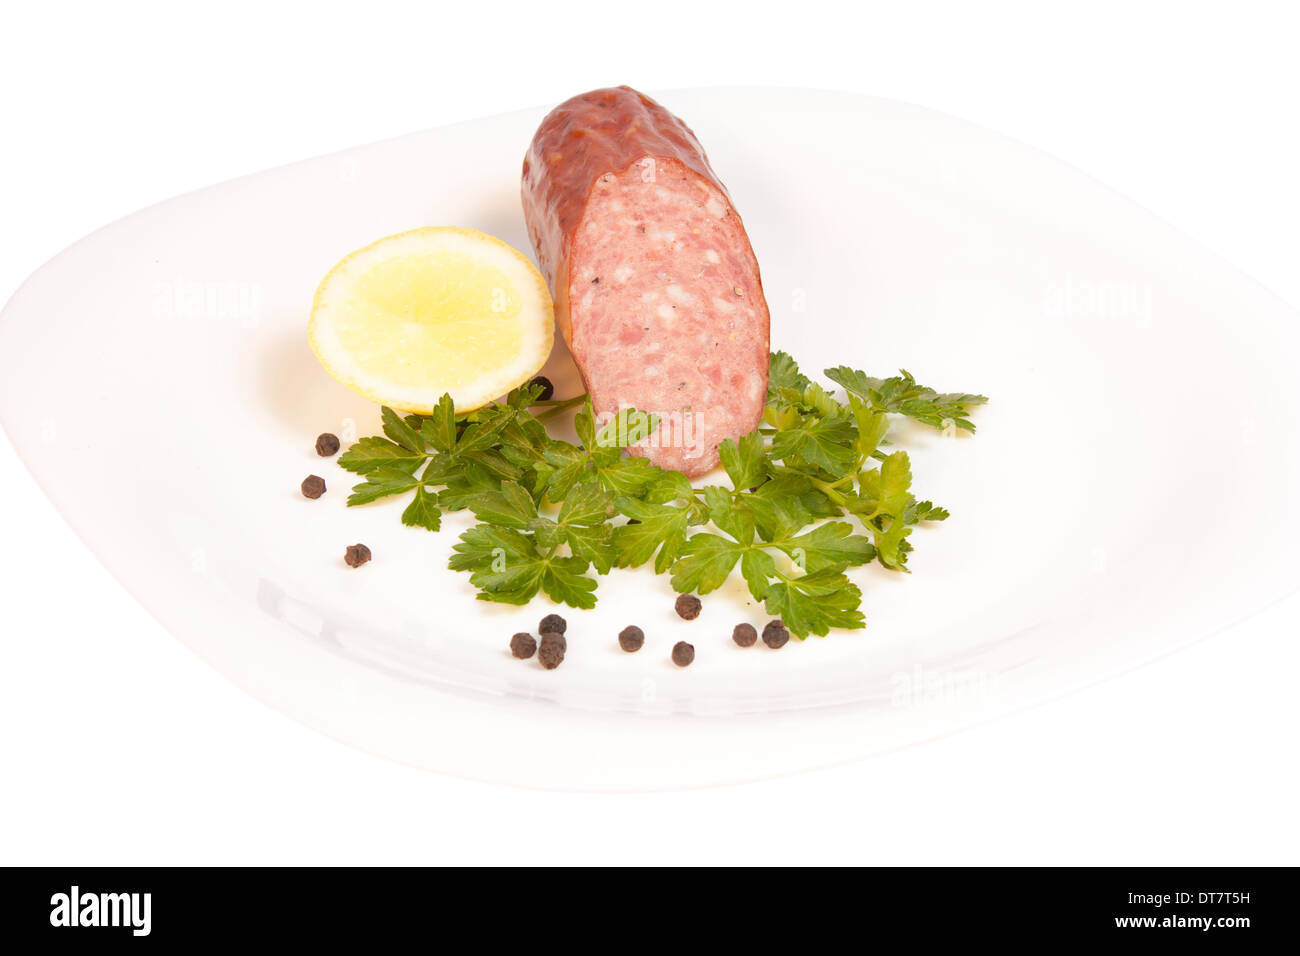 Salami with parsley, lemon and pepper on a plate isolated over white background with clipping path Stock Photo